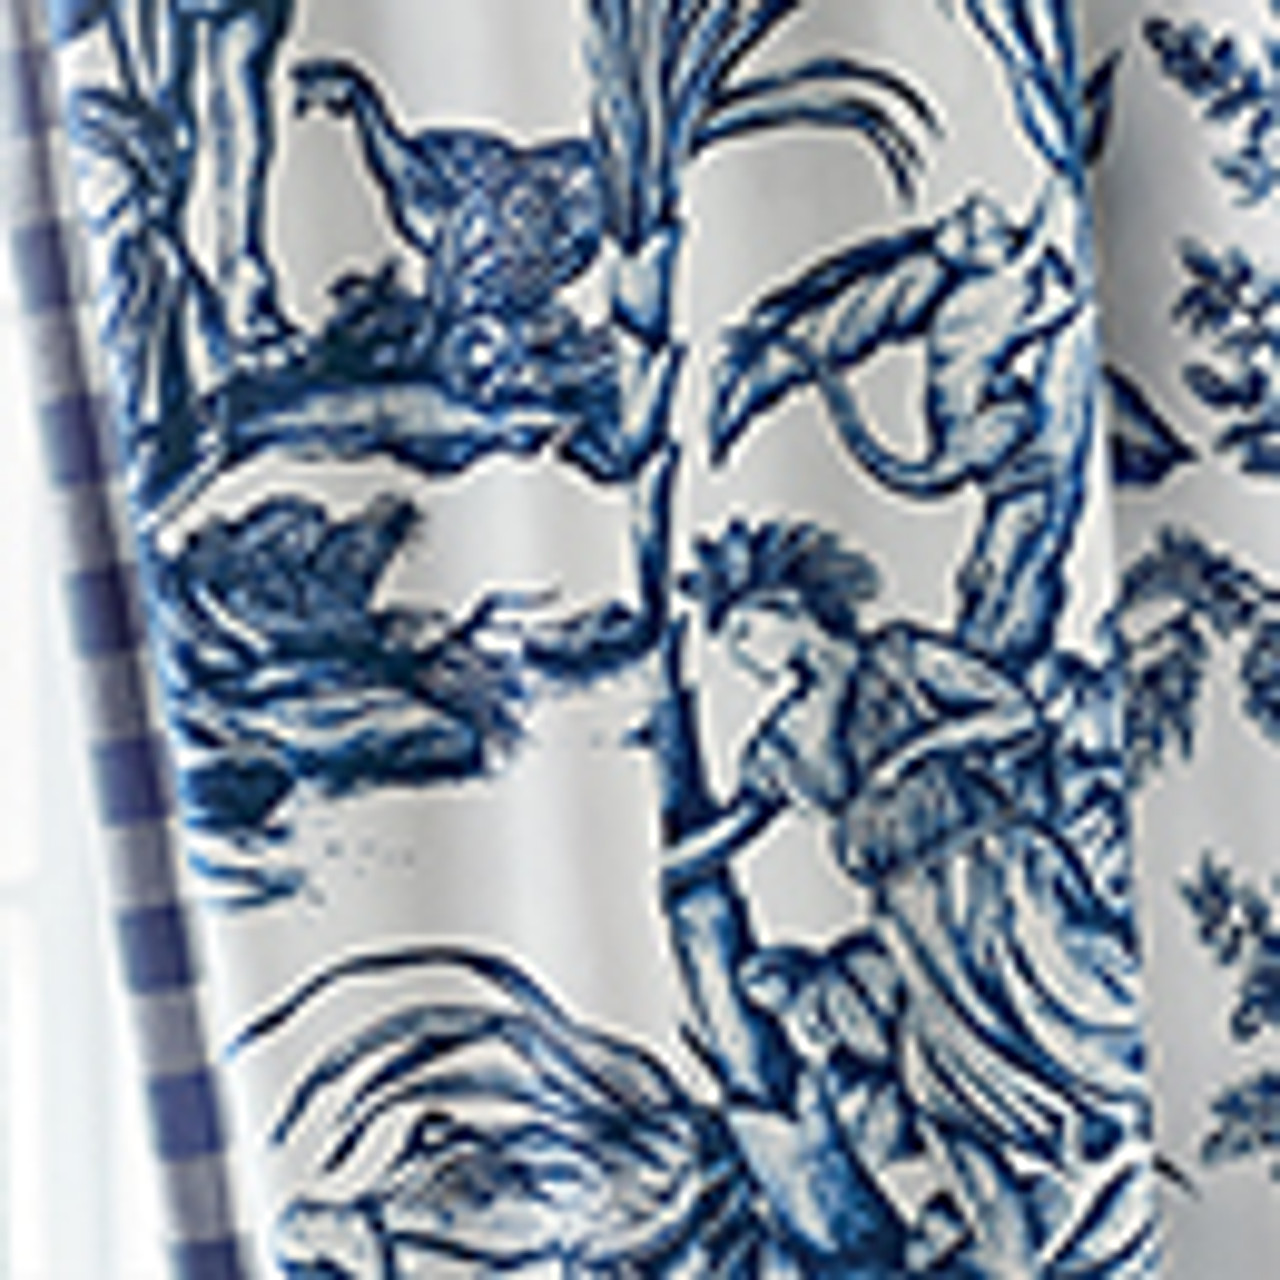 Martinique Island Toile Fabric by The Yard, French Pastoral Print Fabric,  Farmers Under Banana Bamboo Trees Fabric for Upholstery Home Decor